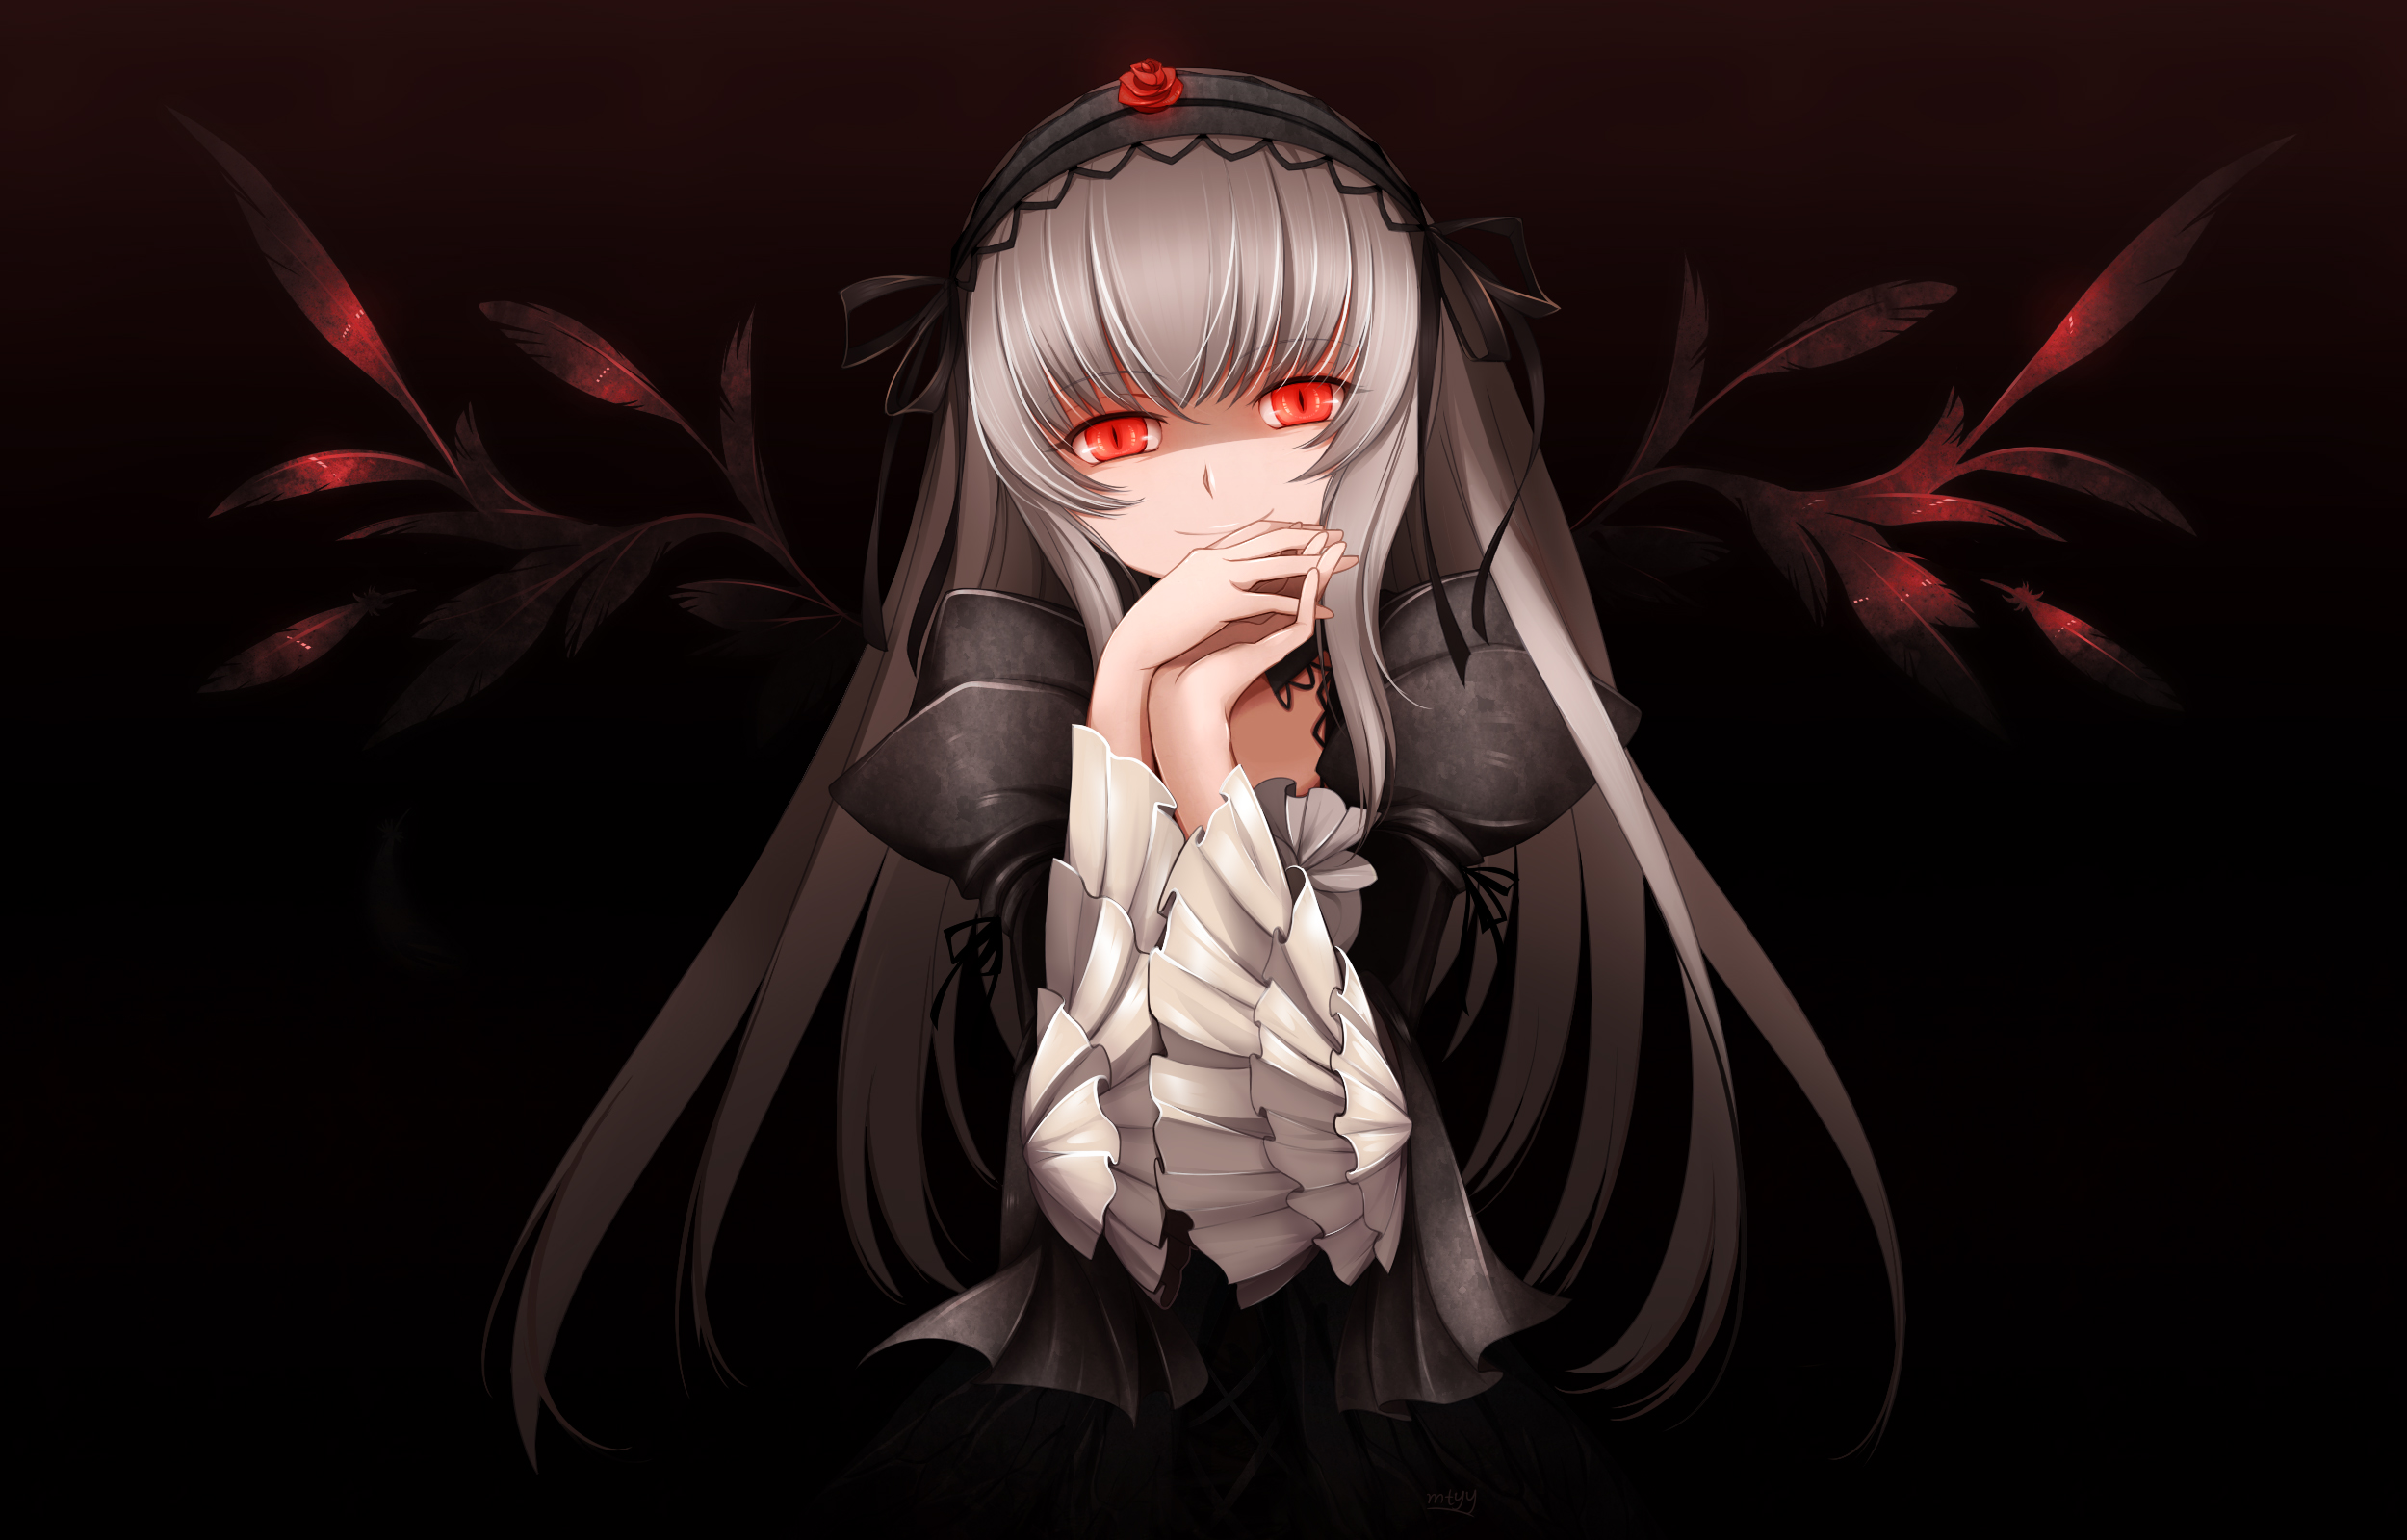 Anim Egirl With Red Eyes Wallpapers